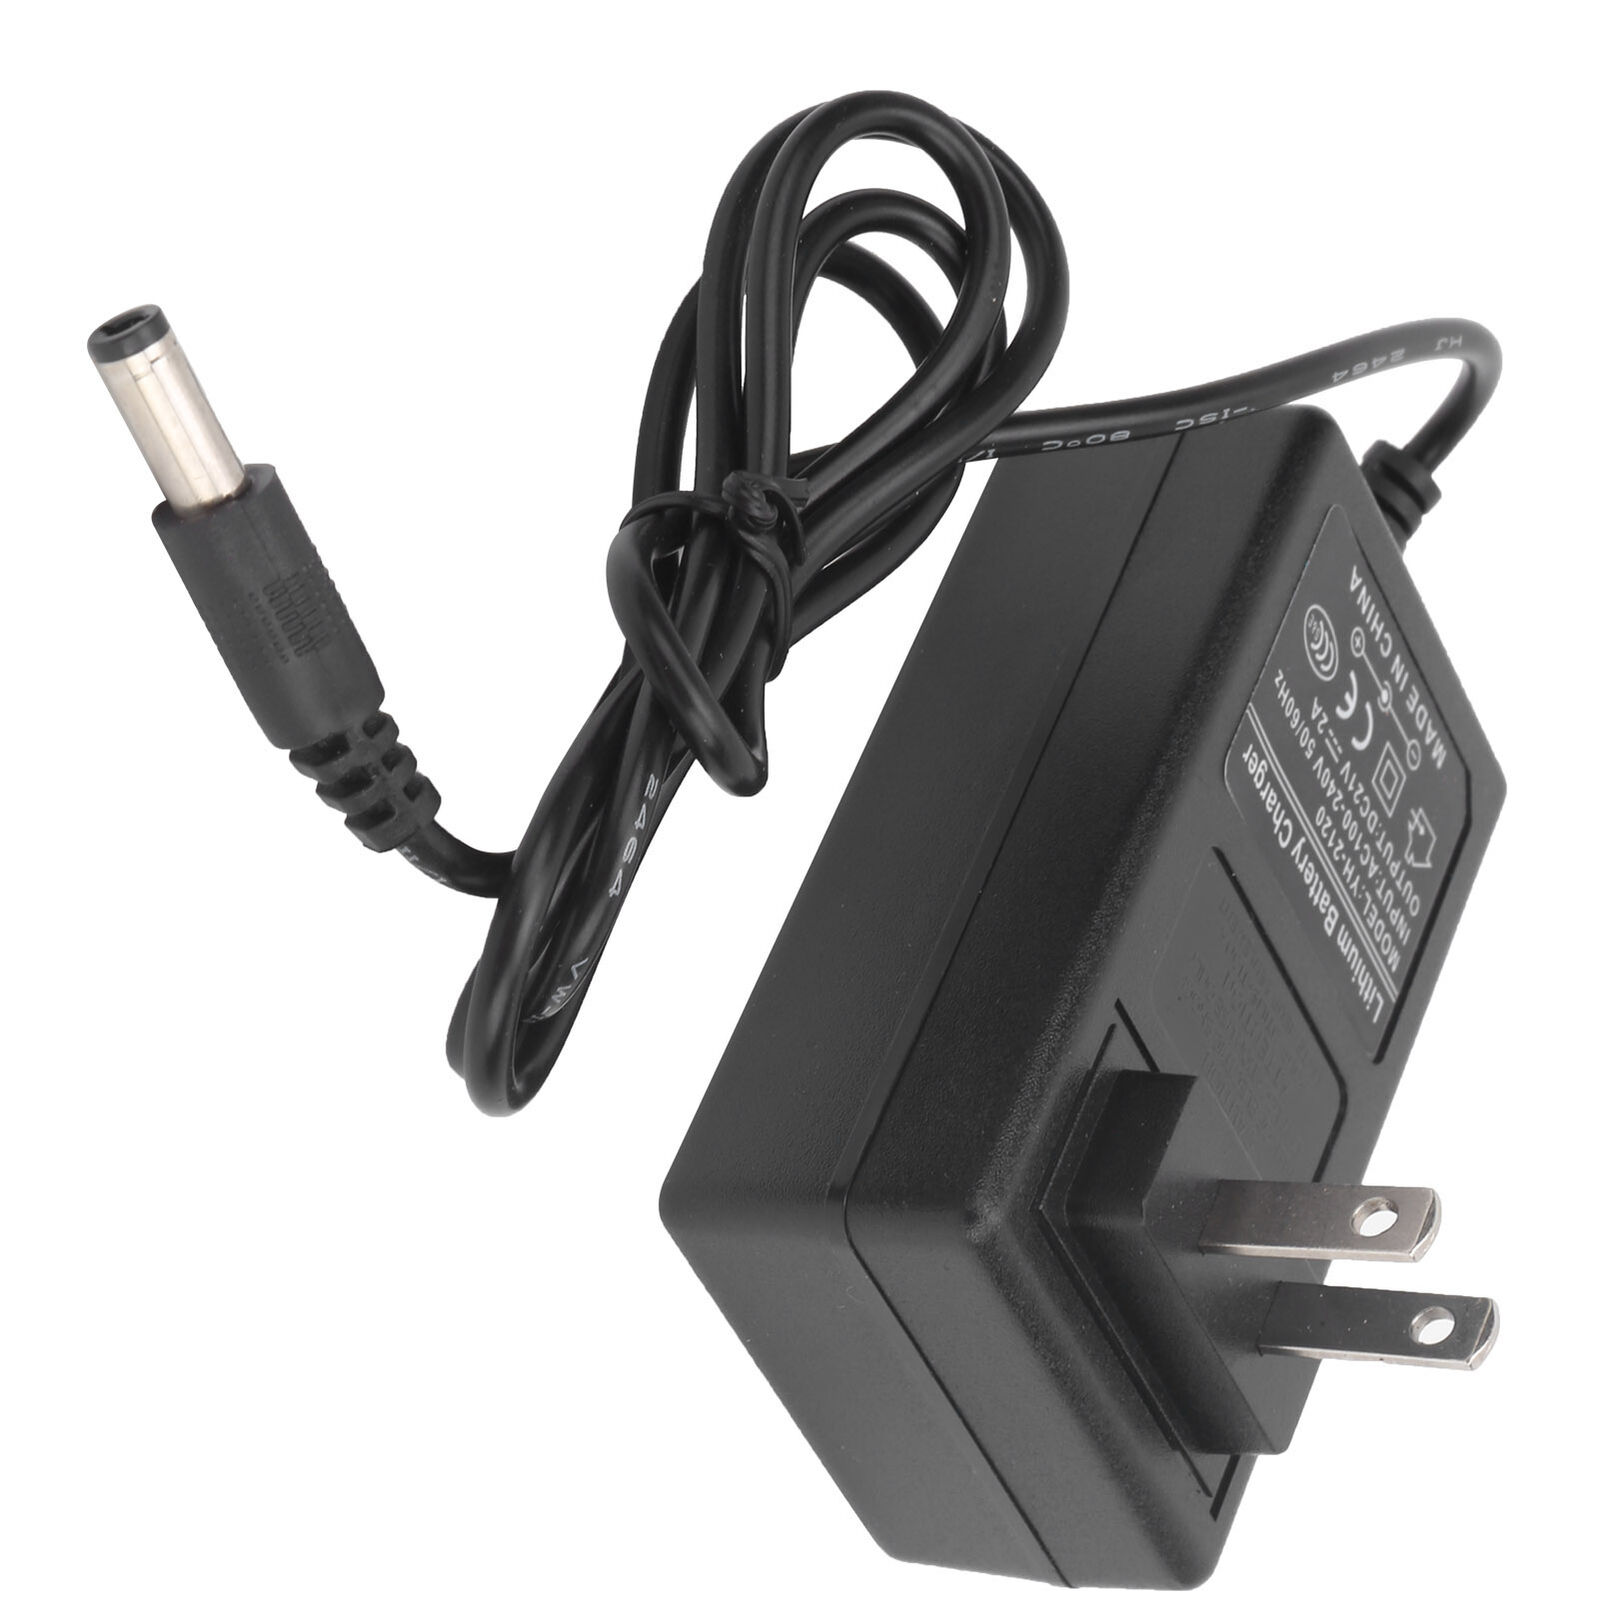 *Brand NEW*Kidsneed SM935E SM935A SM933E Video Baby Monitor AC/DC Adapter Power Charger